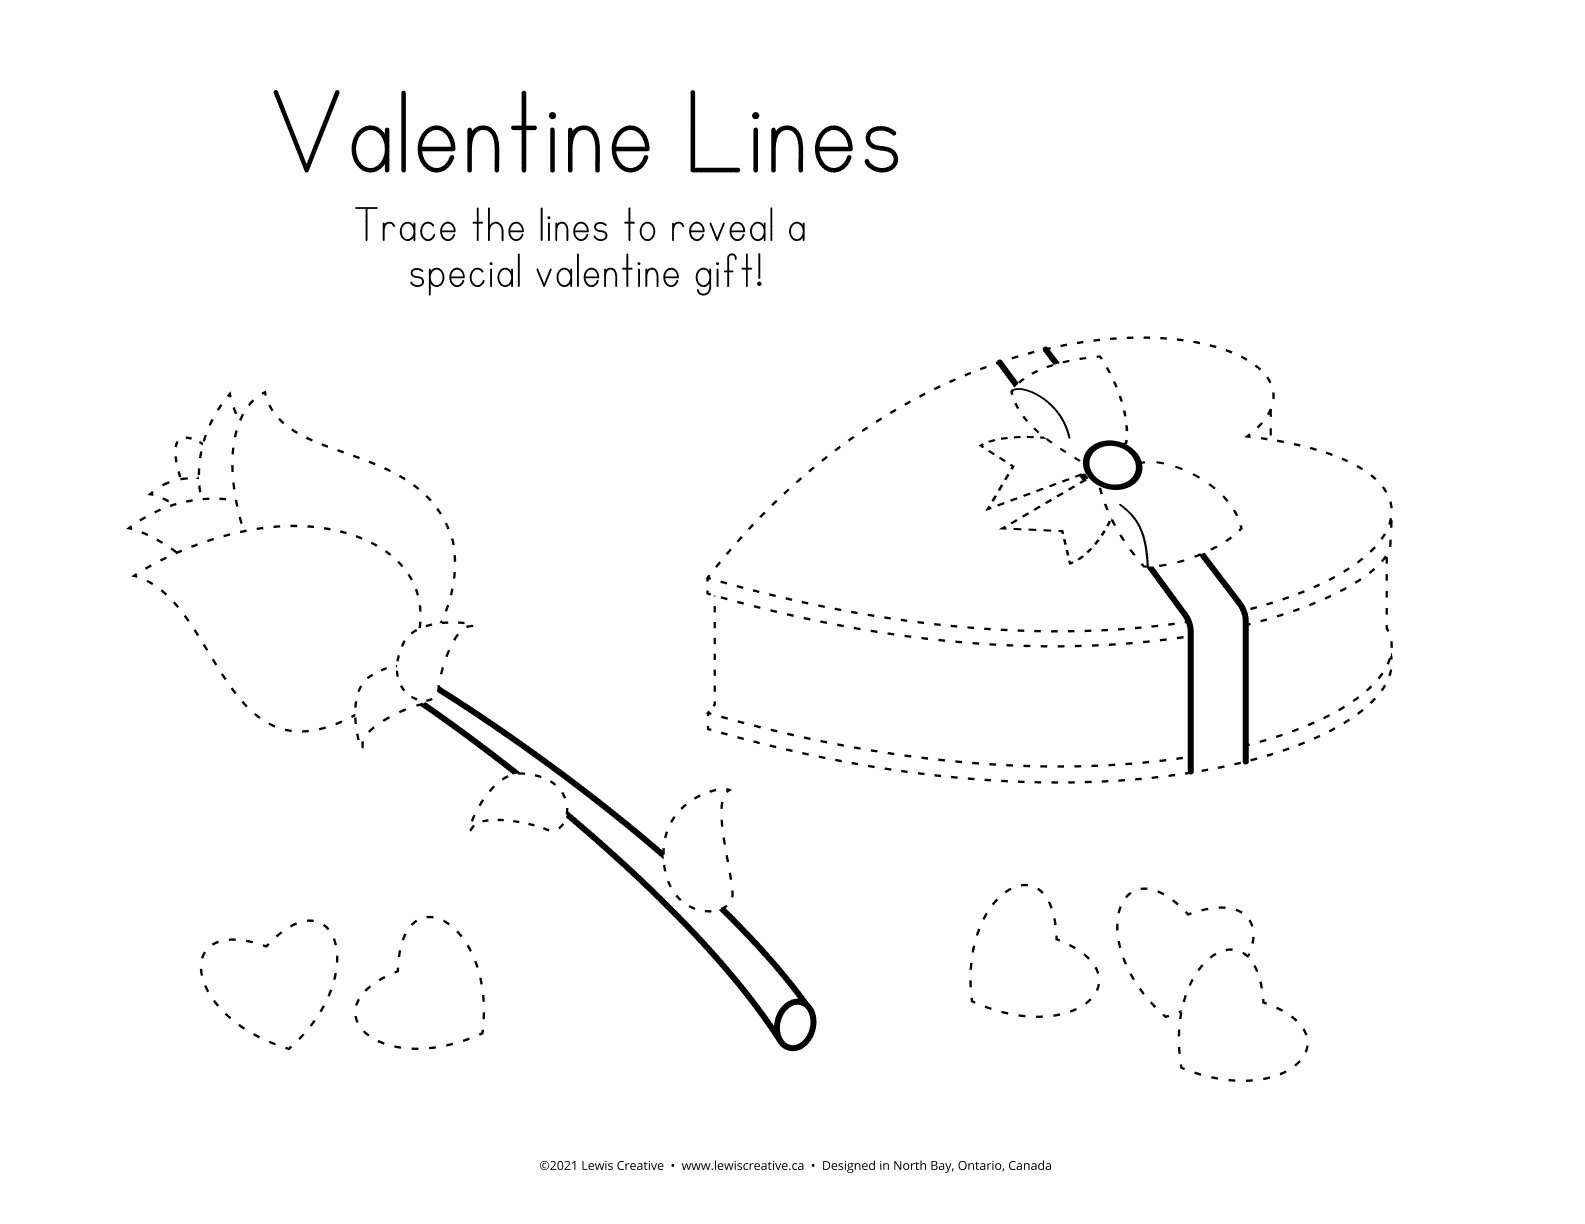 Follow the Path Valentine's Day Tracing Activity - Lewis Creative